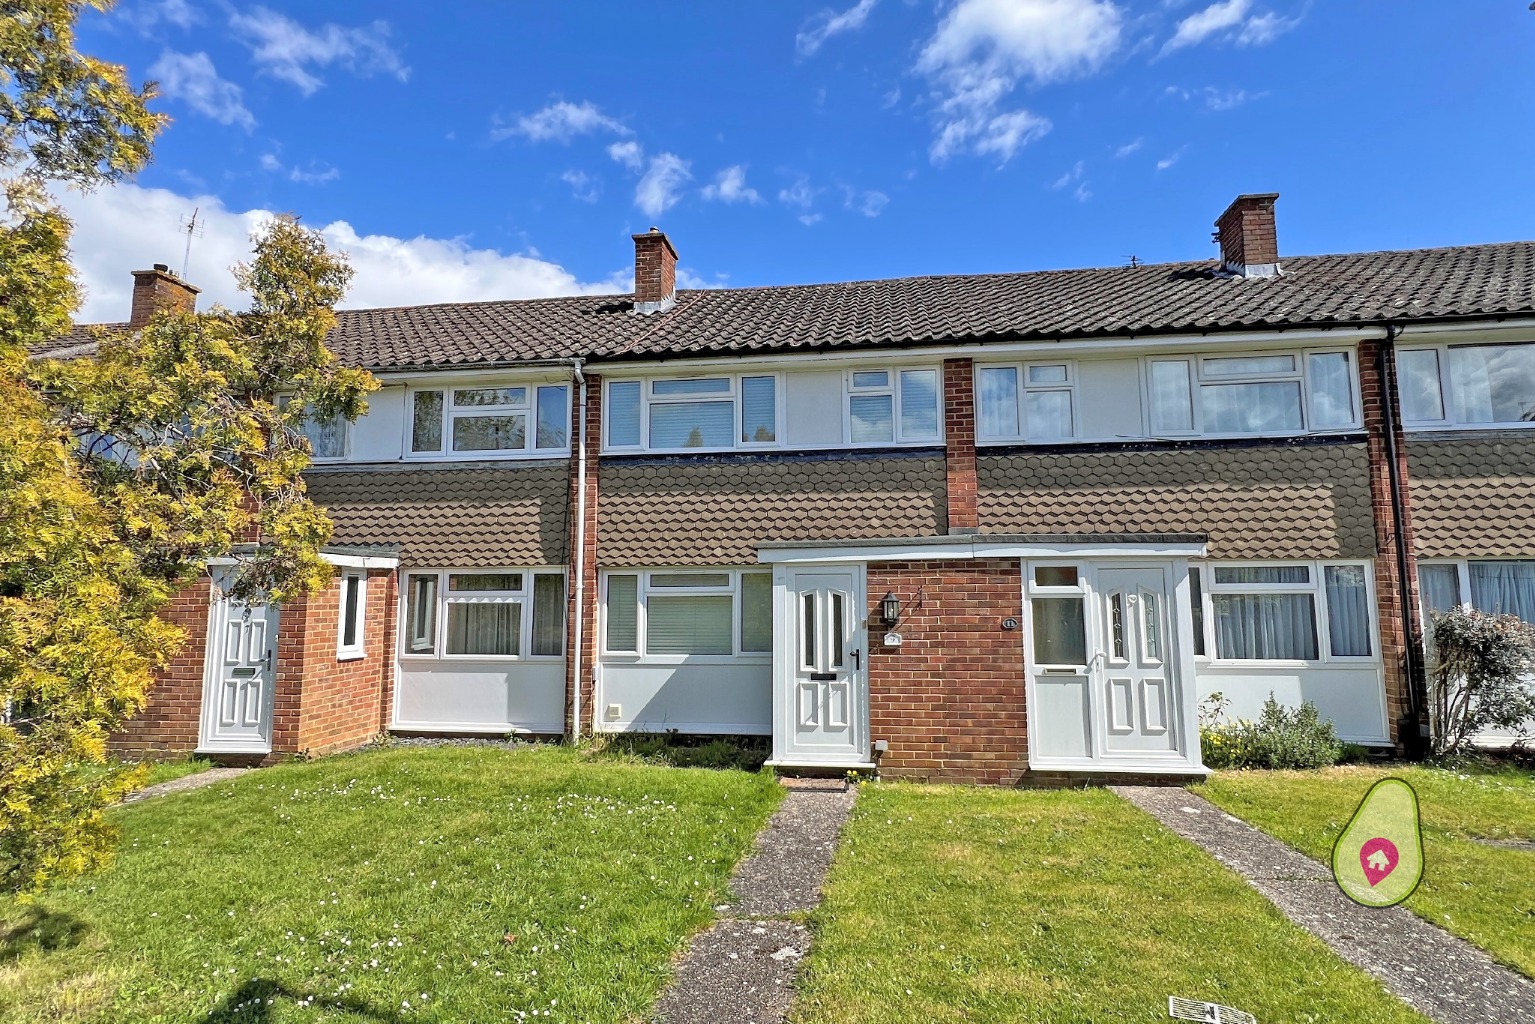 3 bed terraced house for sale in Somerset Walk, Reading - Property Image 1